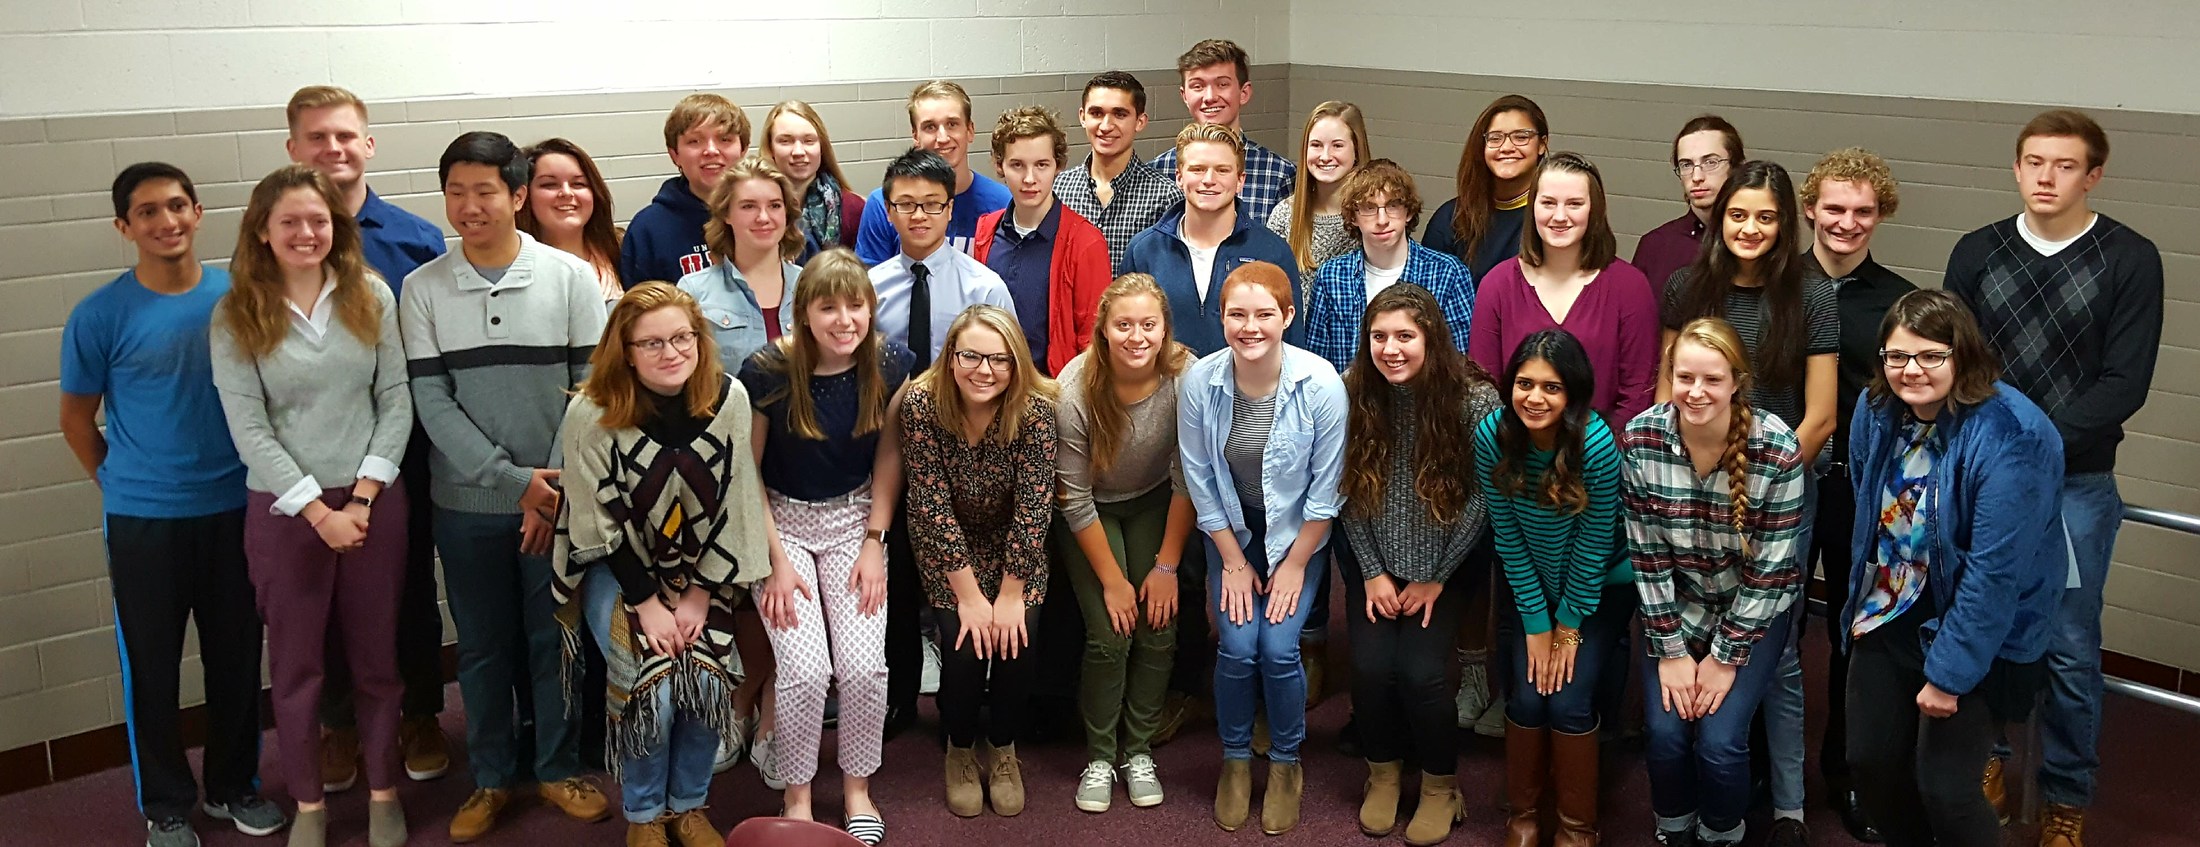 Illinois State Scholars from Moline High School